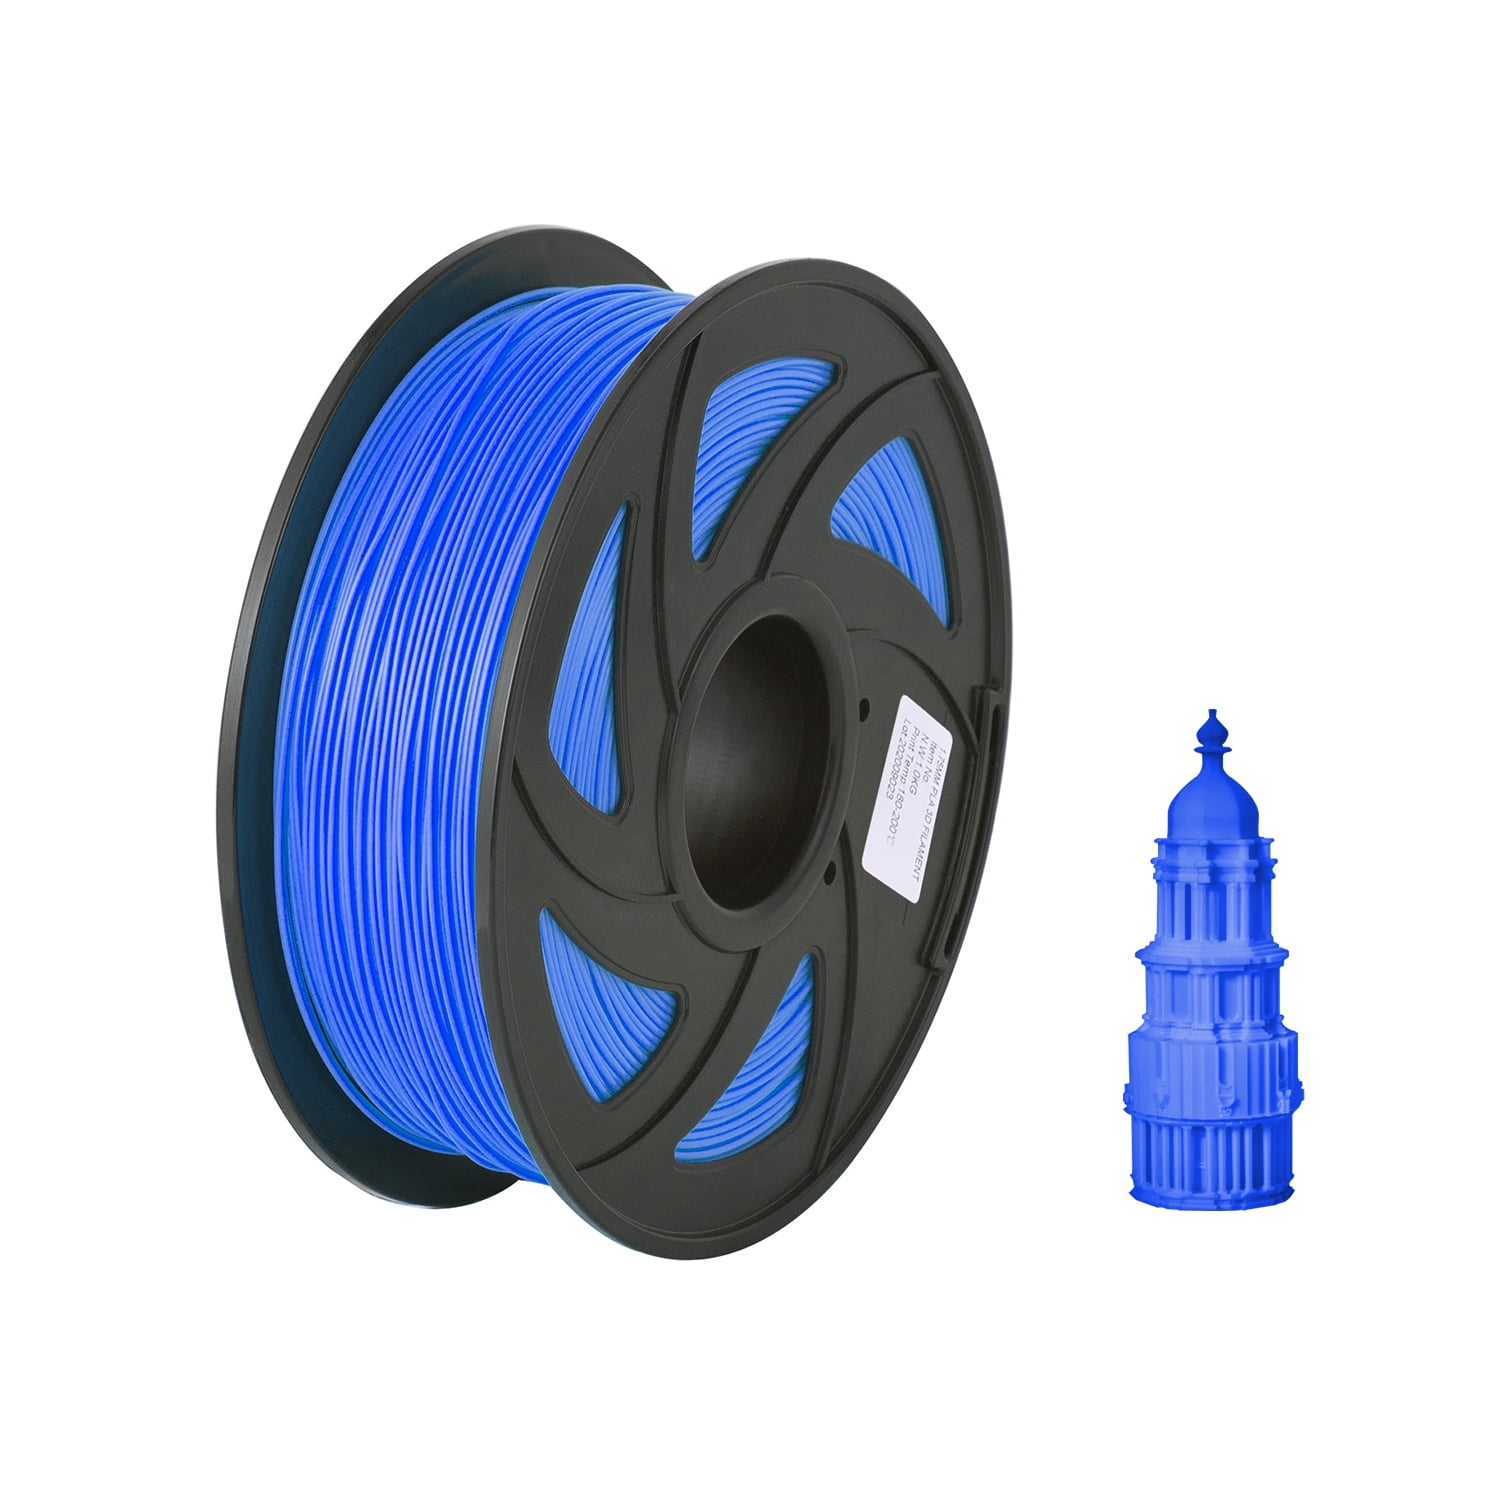 Aibecy Normal PLA 3D Printer Filament Eco-Friendly Printing Consumables 1.75mm Diameter 1kg(2.2lbs) Spool Dimensional Accuracy +/- 0.05mm Blue